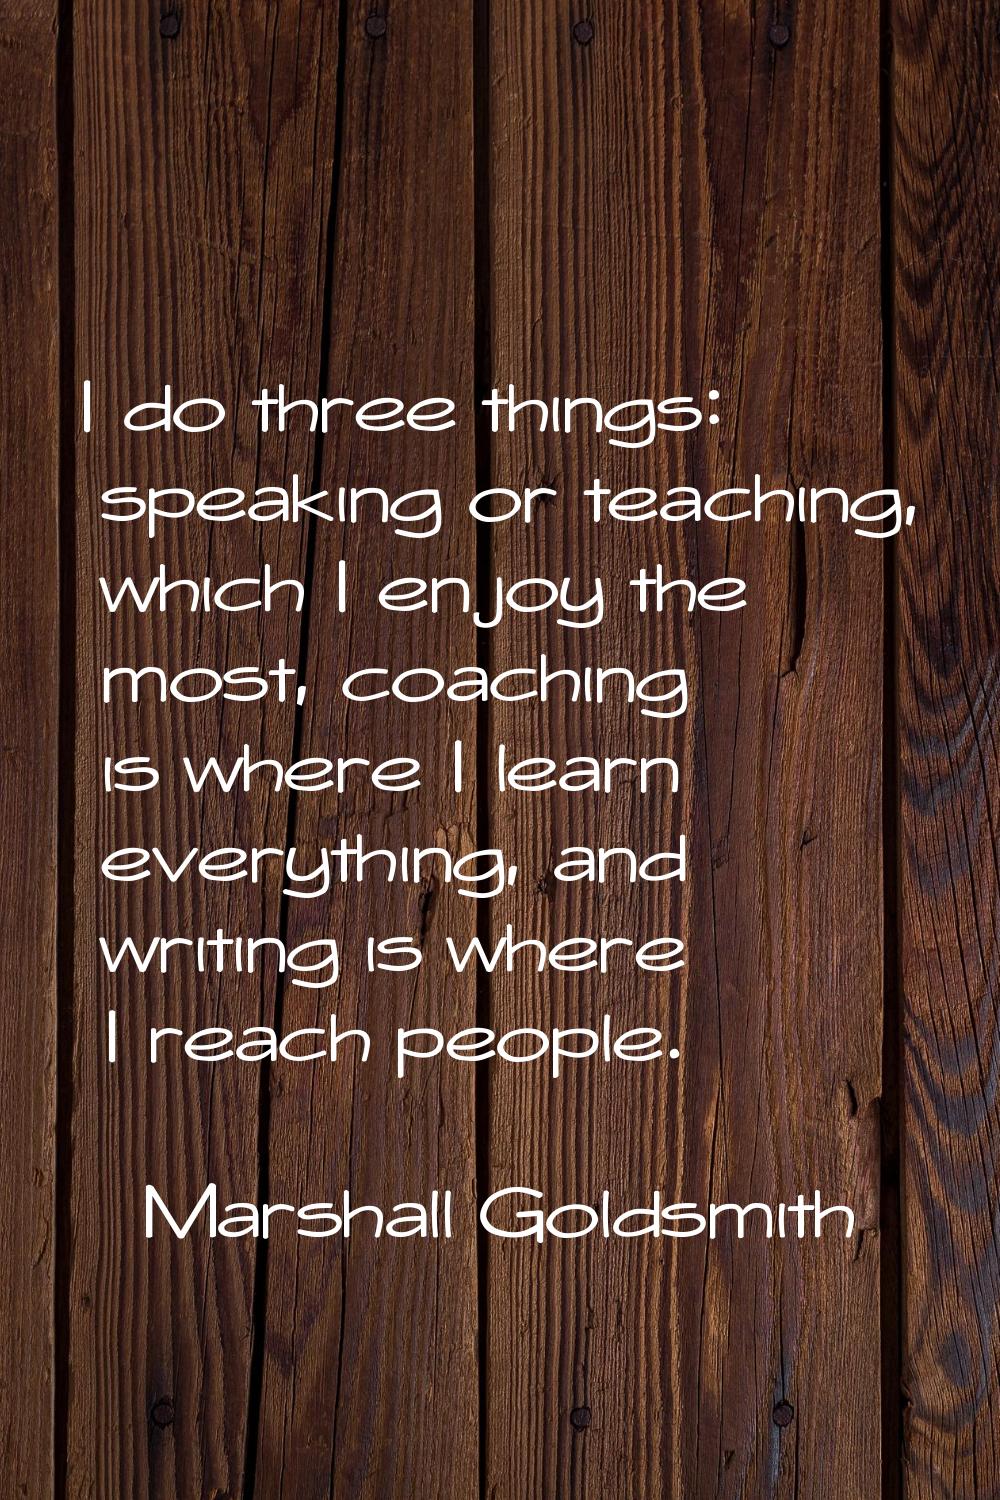 I do three things: speaking or teaching, which I enjoy the most, coaching is where I learn everythi